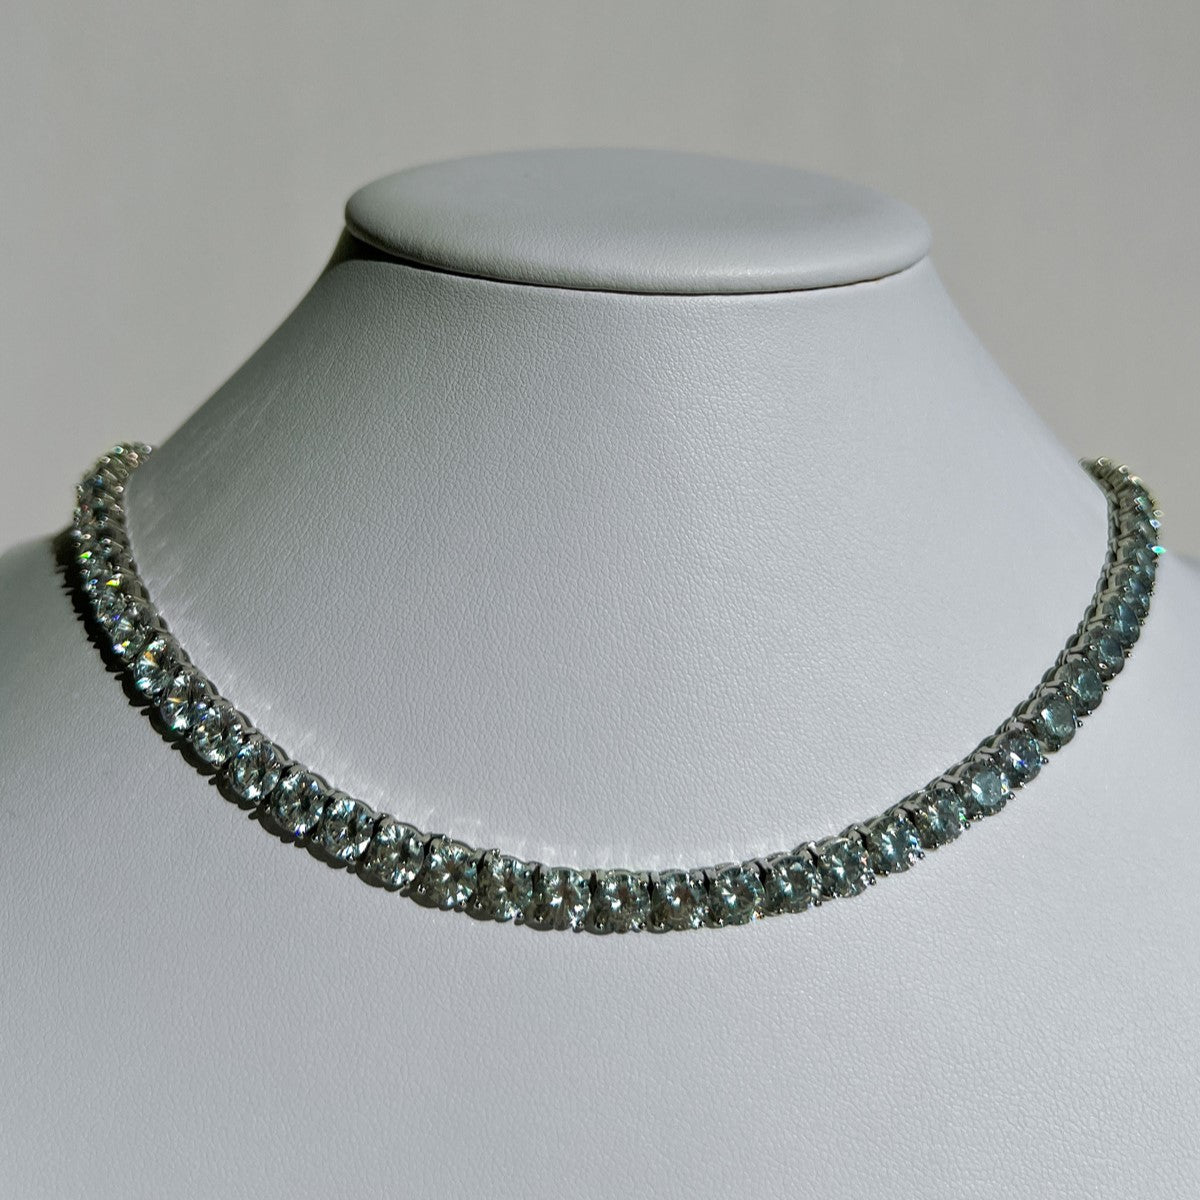 TENNIS NECKLACE "SIMPLE THING" WITH CZ 6 / SILVER